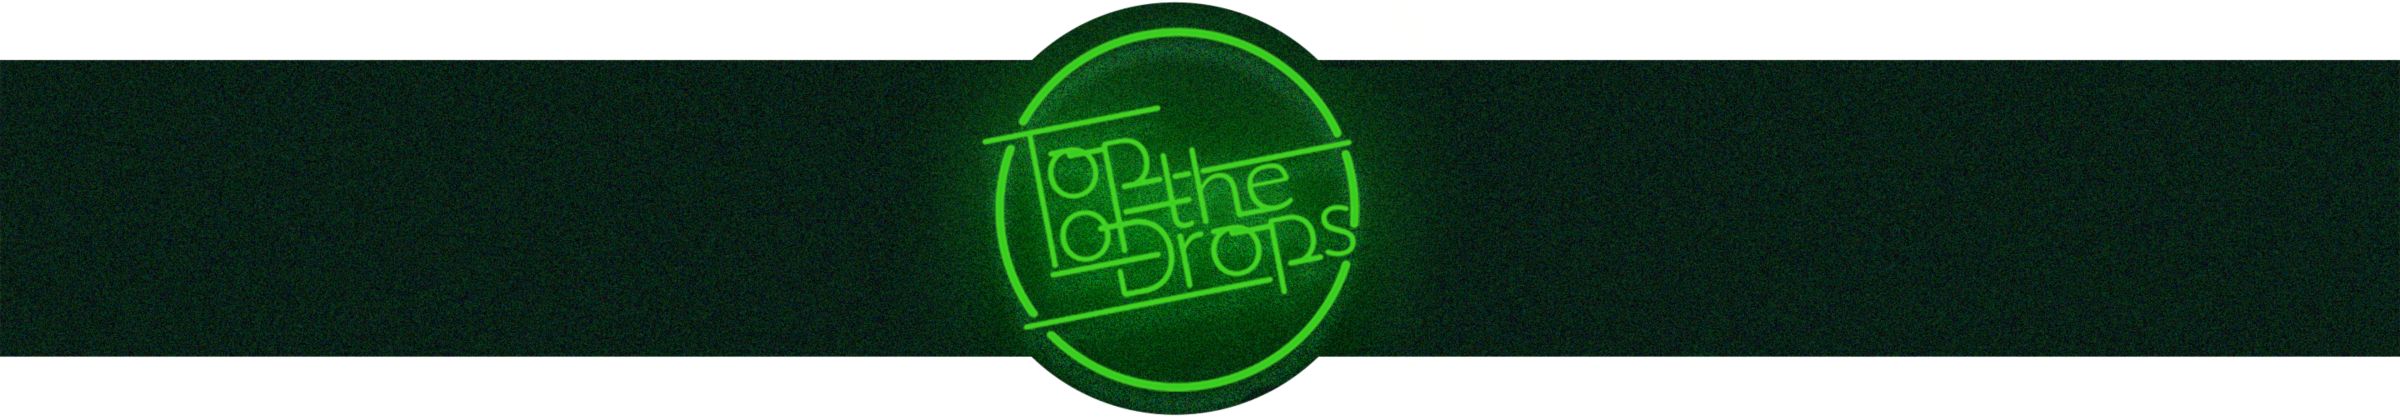 Top of the Drops Neon sign